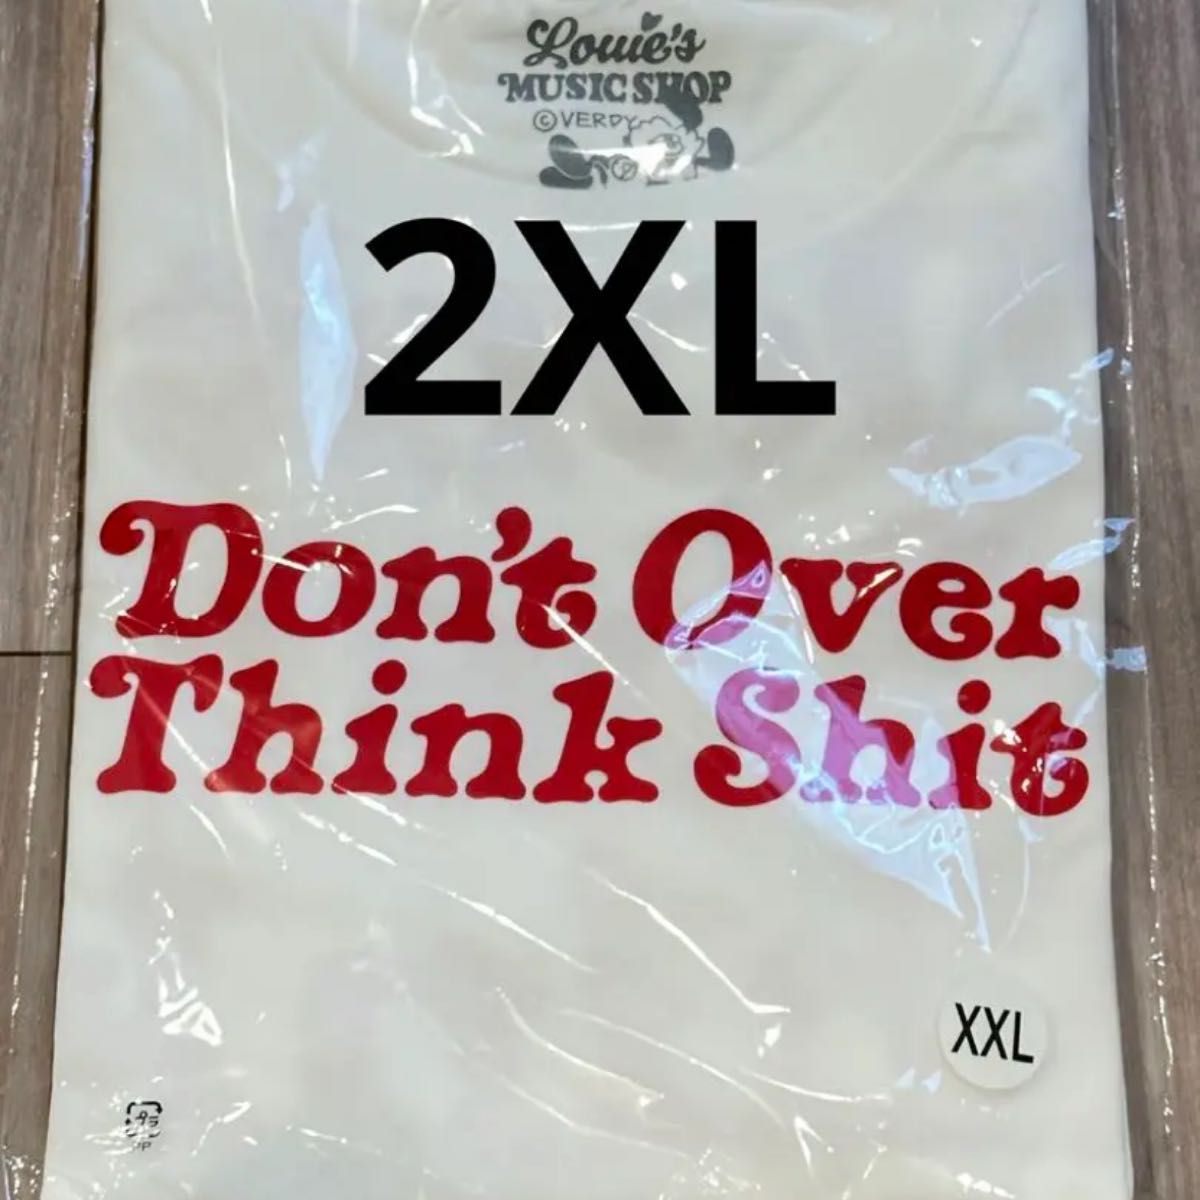 Verdy X dontoverthinkshit Popup Tee｜PayPayフリマ